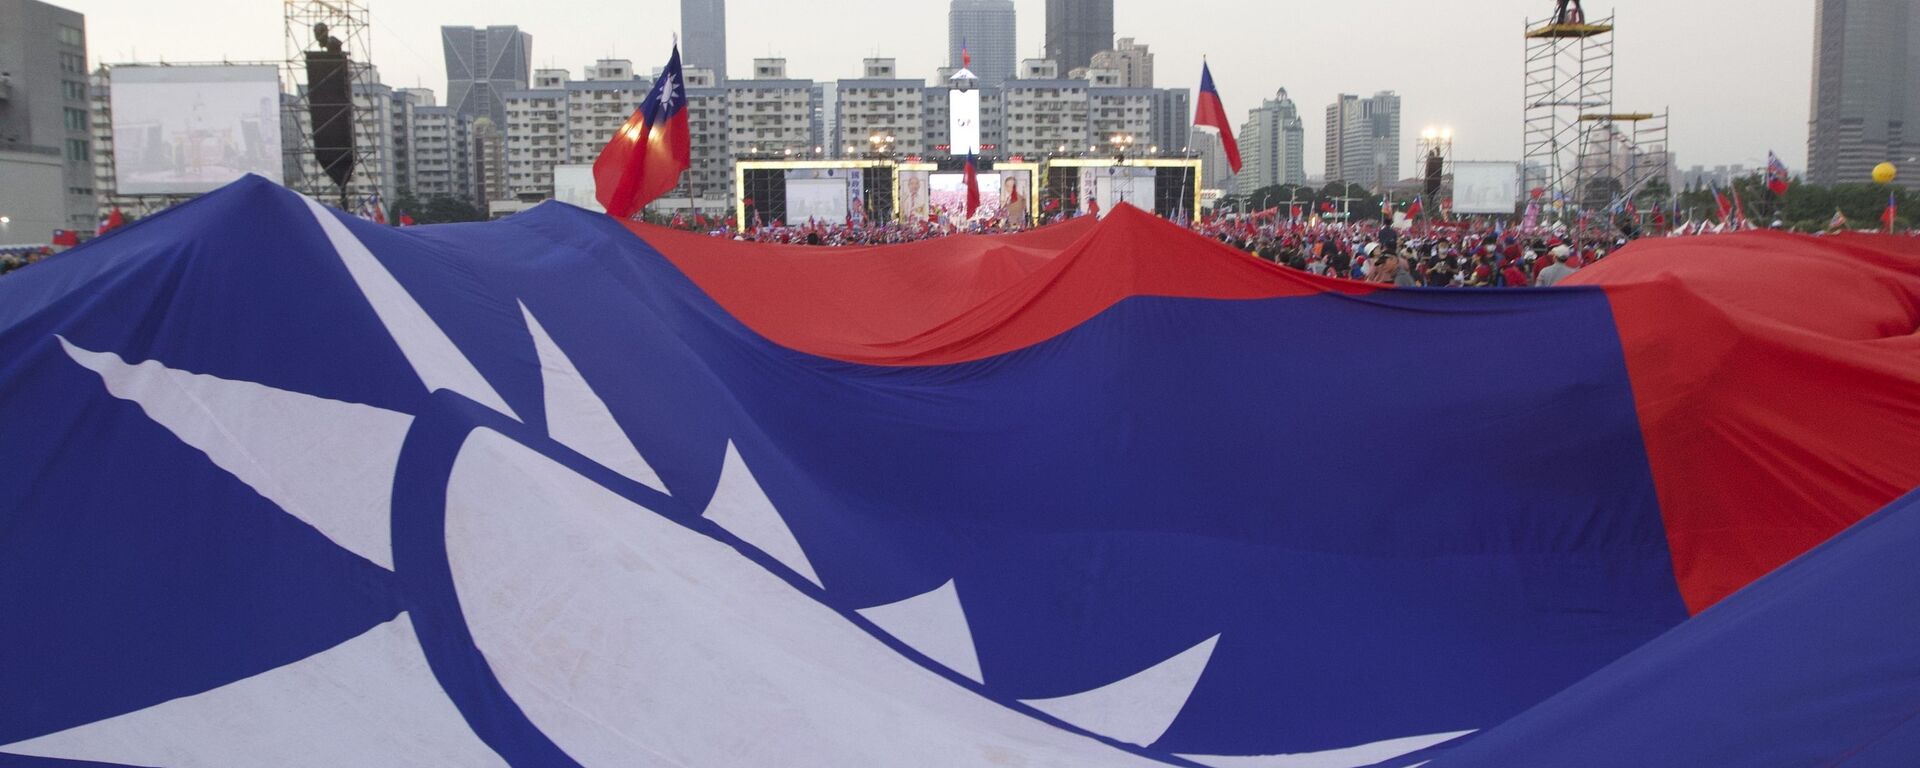 Supporters of Taiwan's 2020 presidential election candidate for the KMT, or Nationalist Party, Han Kuo-yu pass along a giant Taiwanese flag for the start of a campaign rally in southern Taiwan's Kaohsiung city on Friday, Jan 10, 2020 - Sputnik International, 1920, 18.01.2022